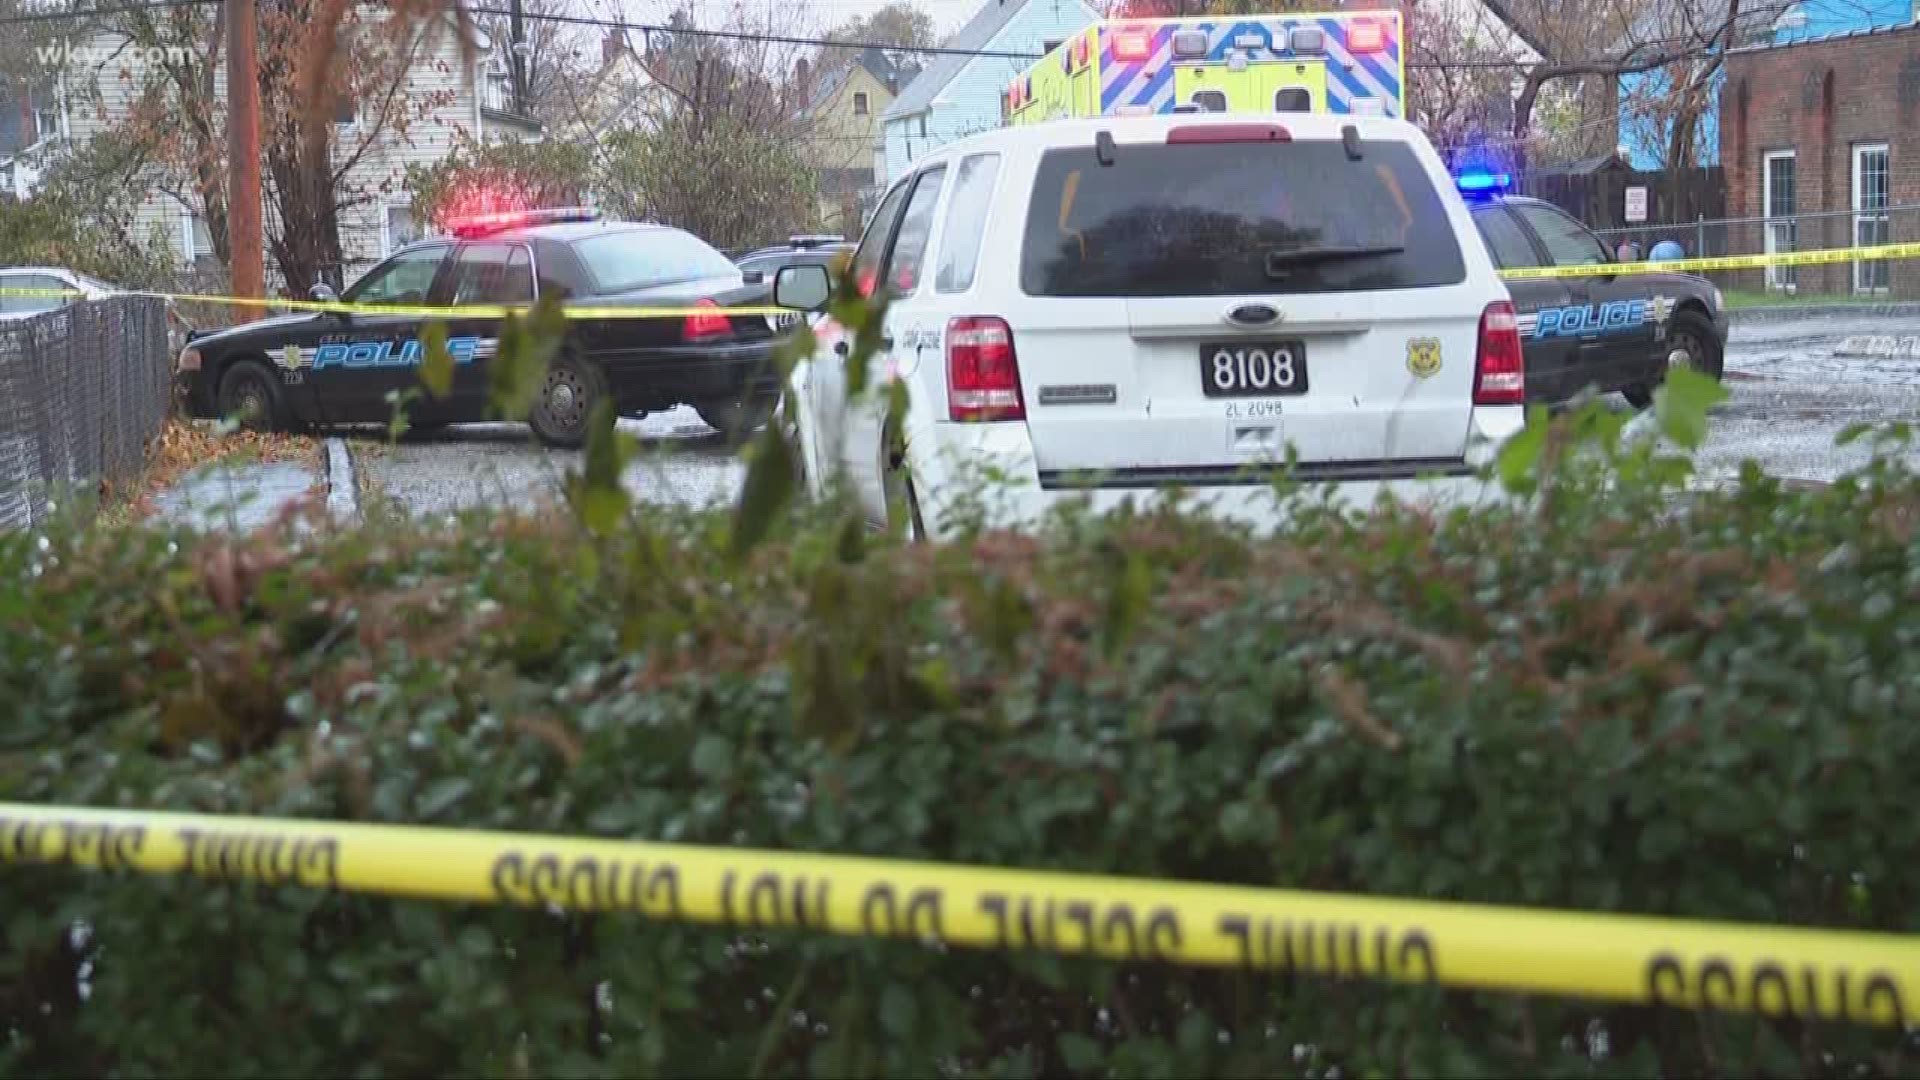 Woman run over by own car after donating to a local church, suspects at large